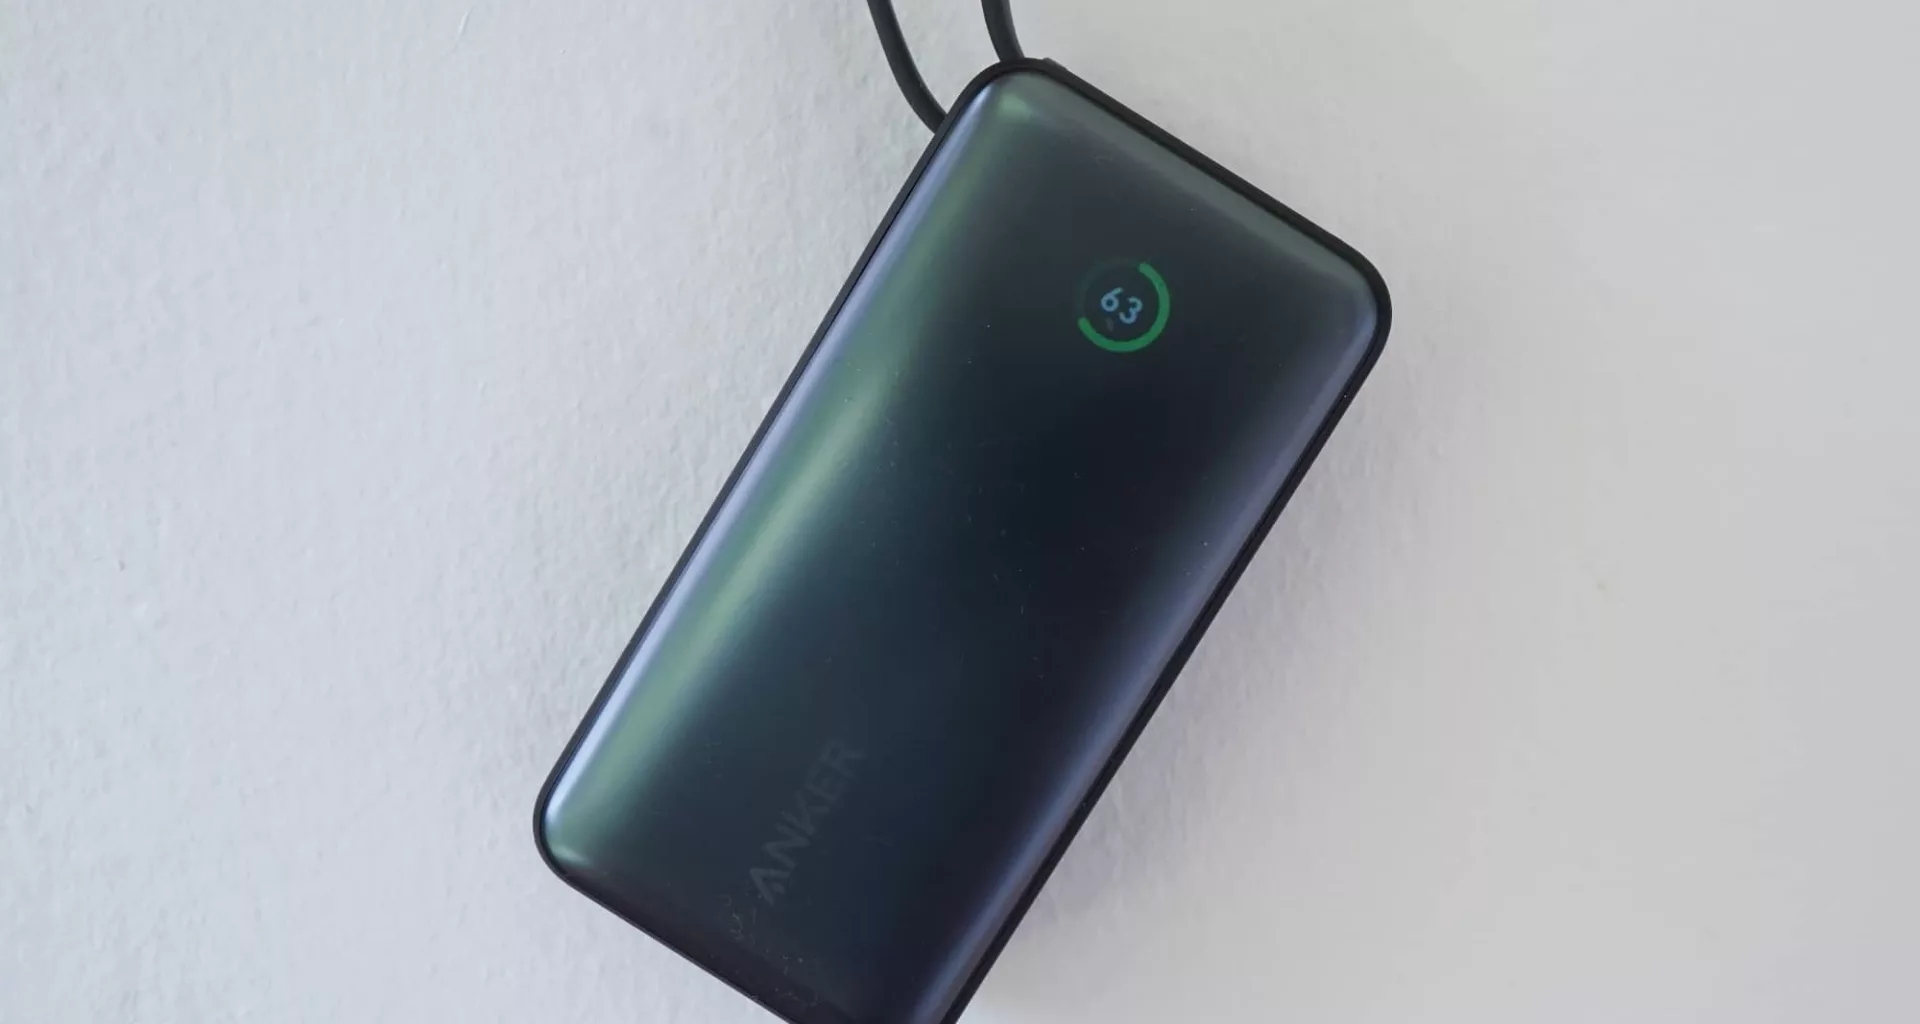 Tech Review: The Anker 5,000 mAh USB-C Nano Power Bank is small but mighty  - The AU Review